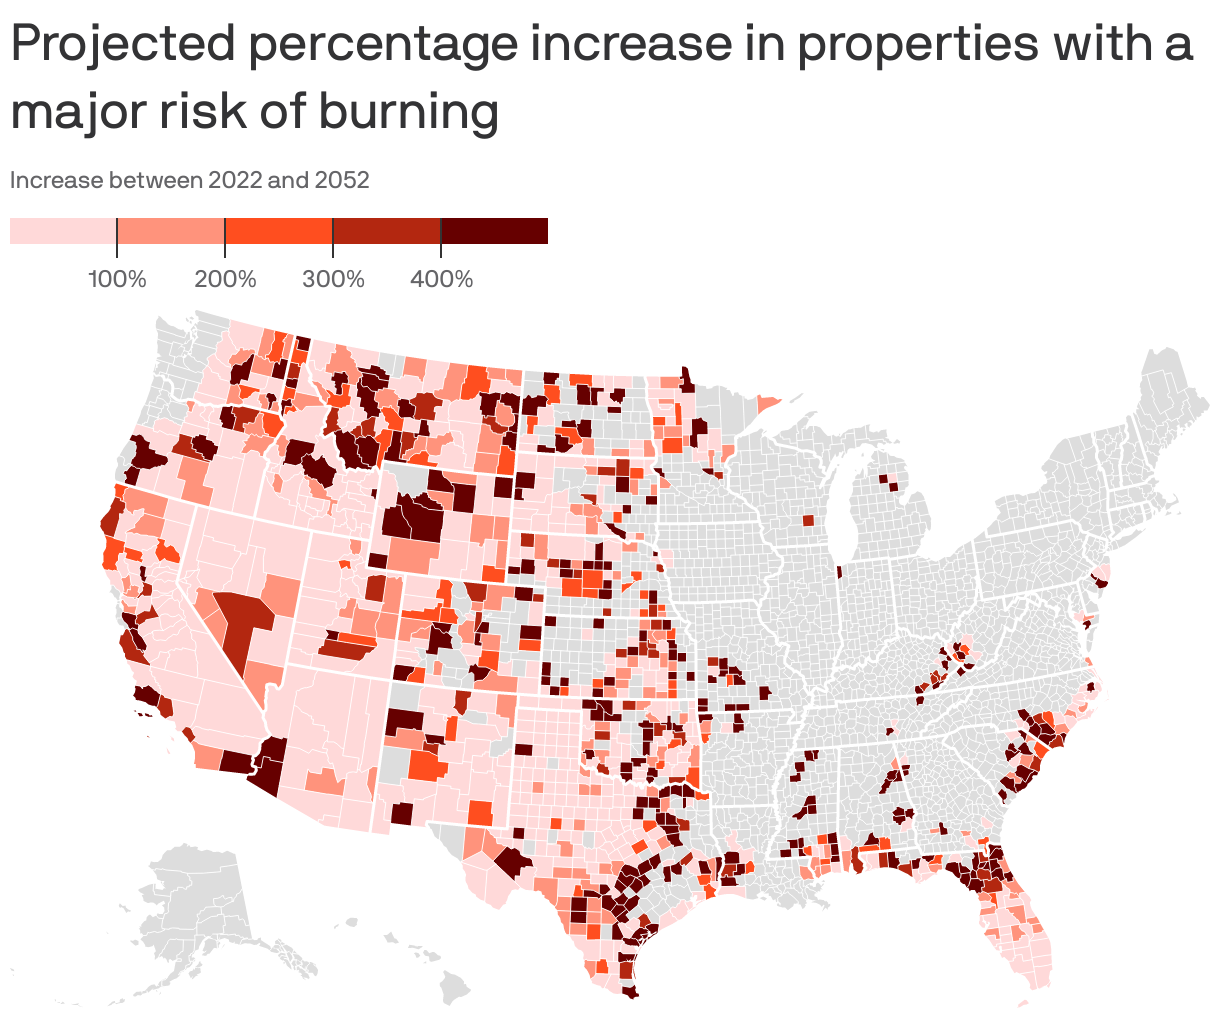 Projected percentage increase in properties with a major risk of burning